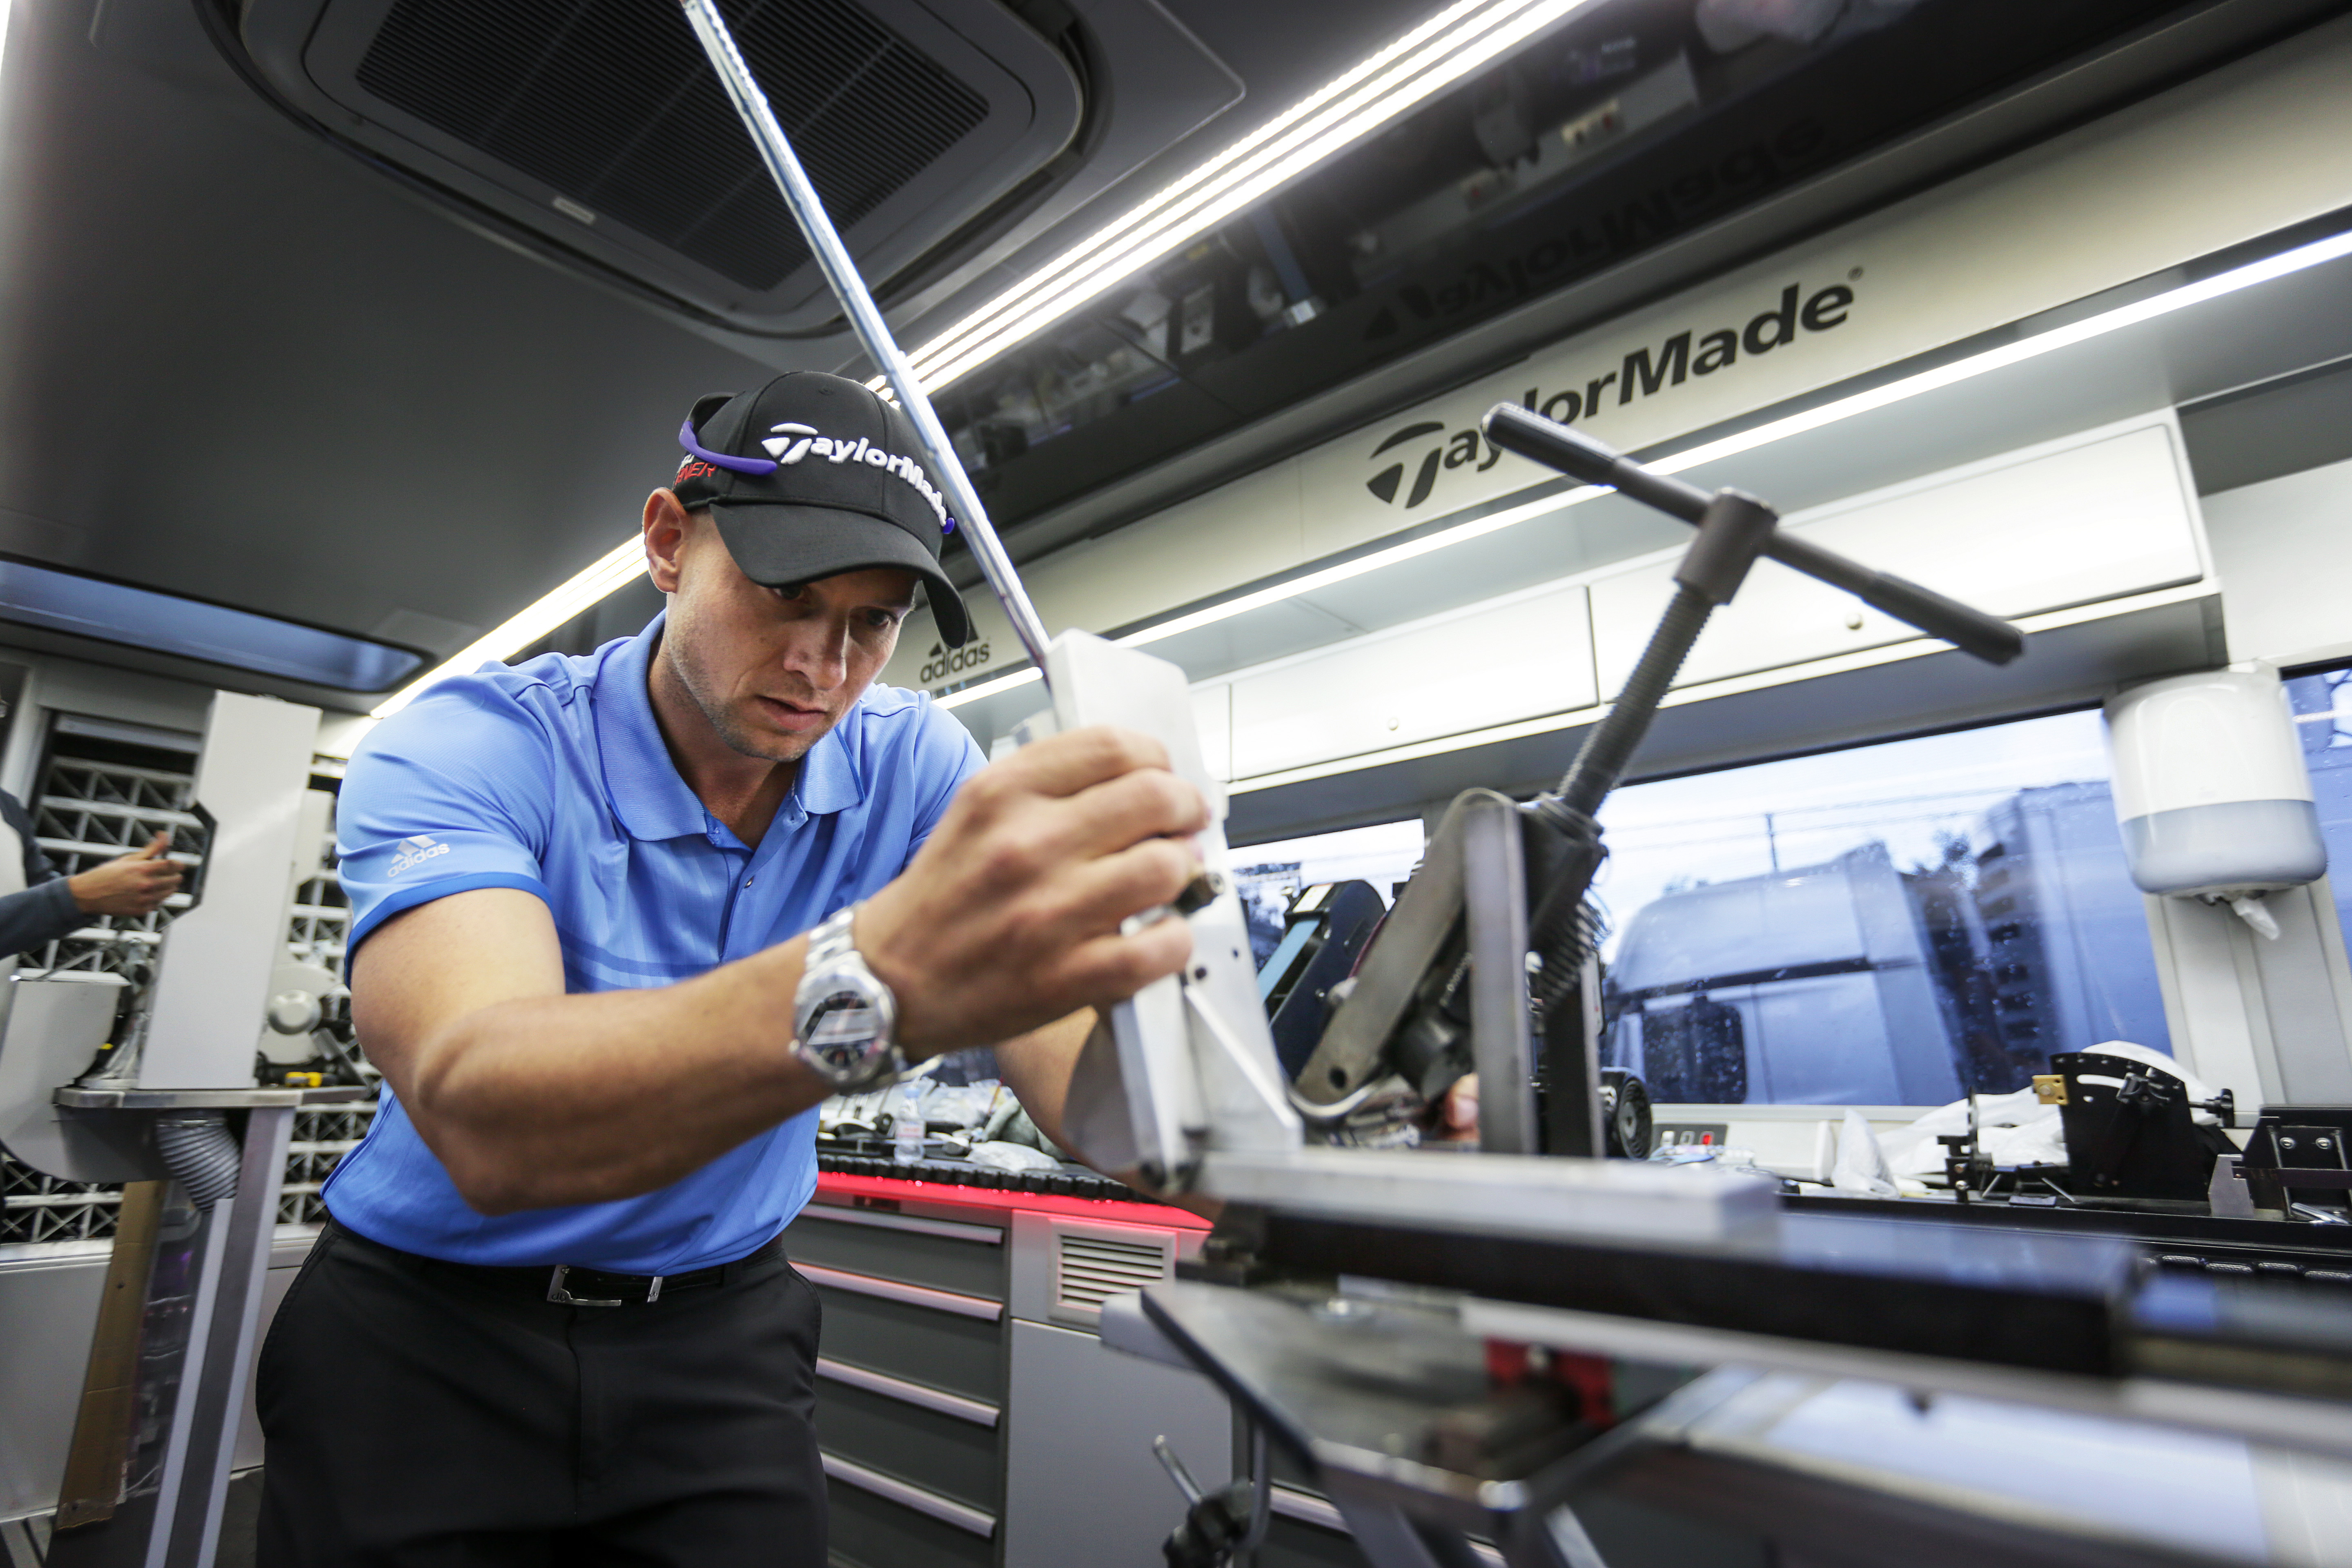 The Tour Truck is open to players from Monday to Wednesday (Photo: TaylorMade)